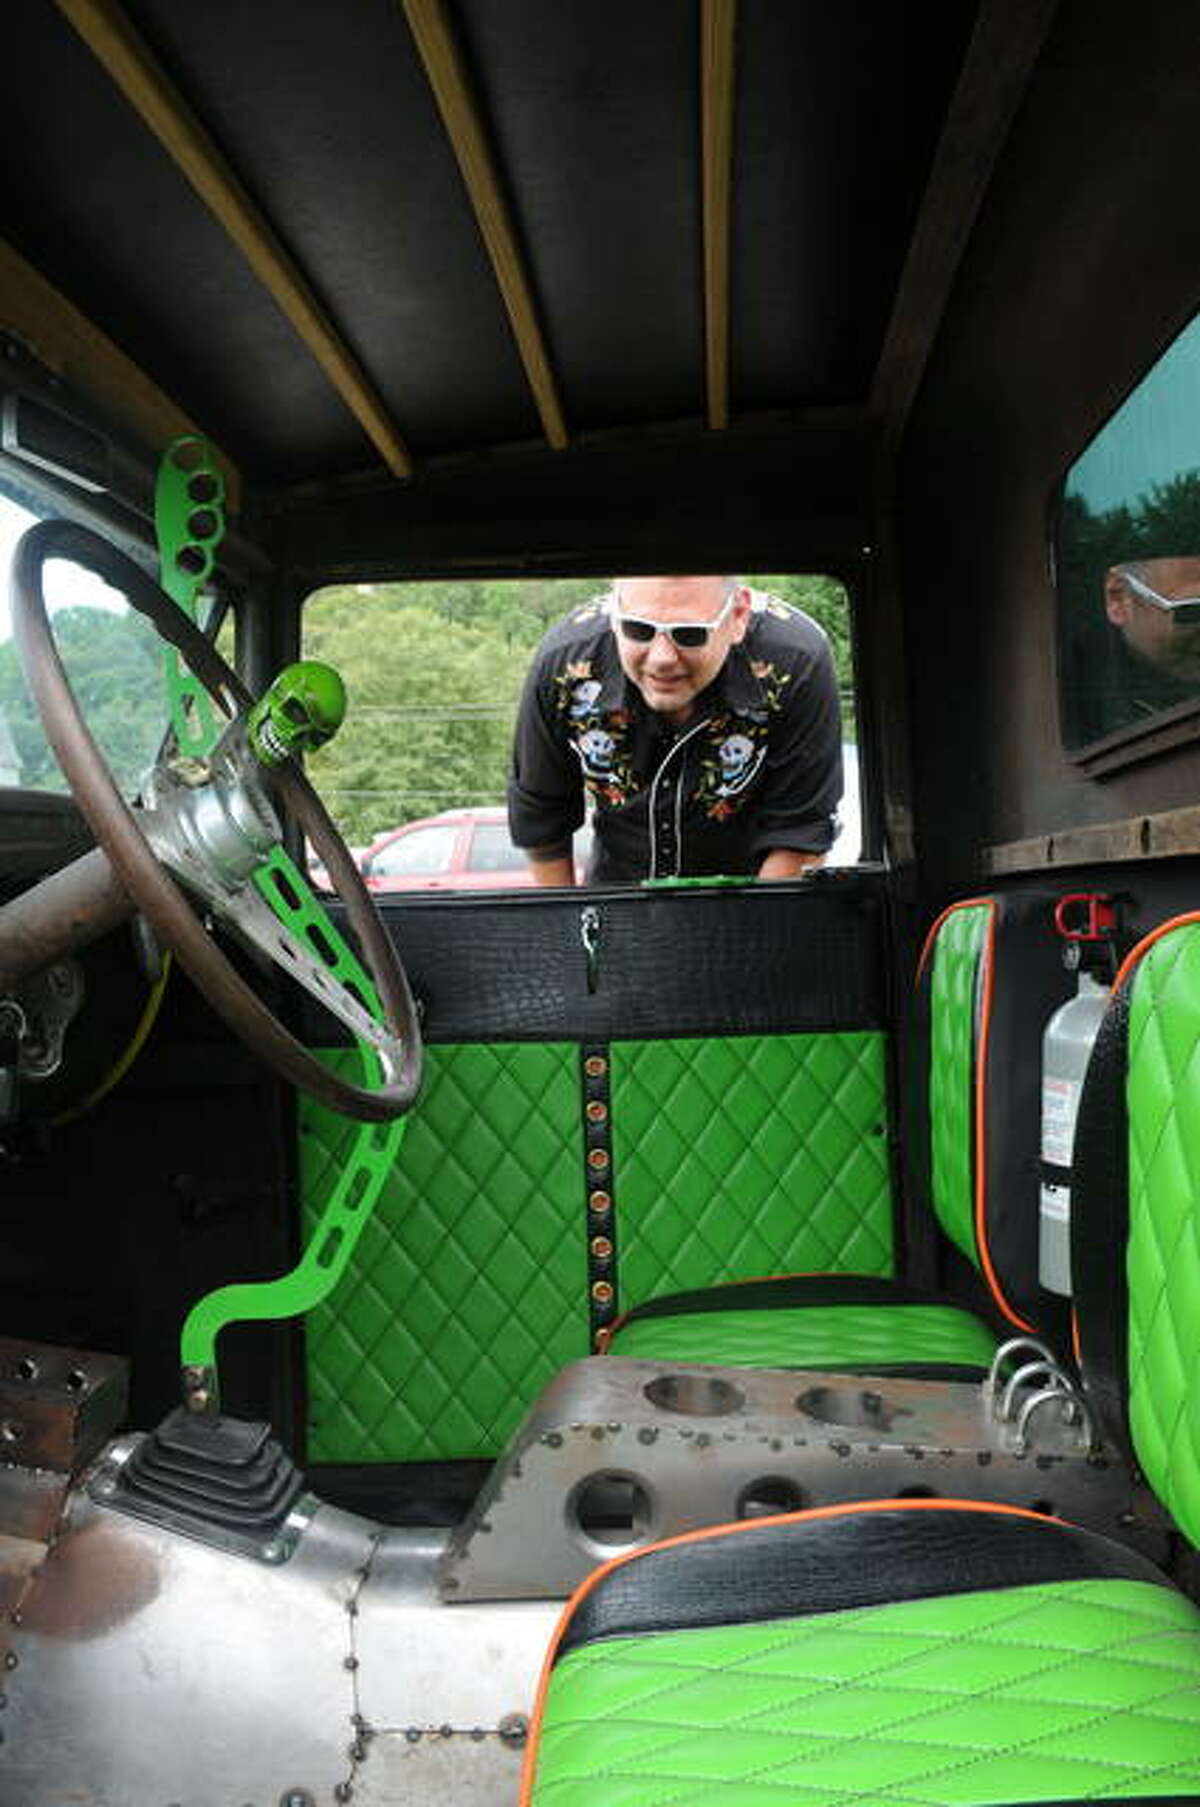 Joe Kozuszek of Belleville admires the interior of an entry in Saturday’s Rat Rod Show in Grafton.